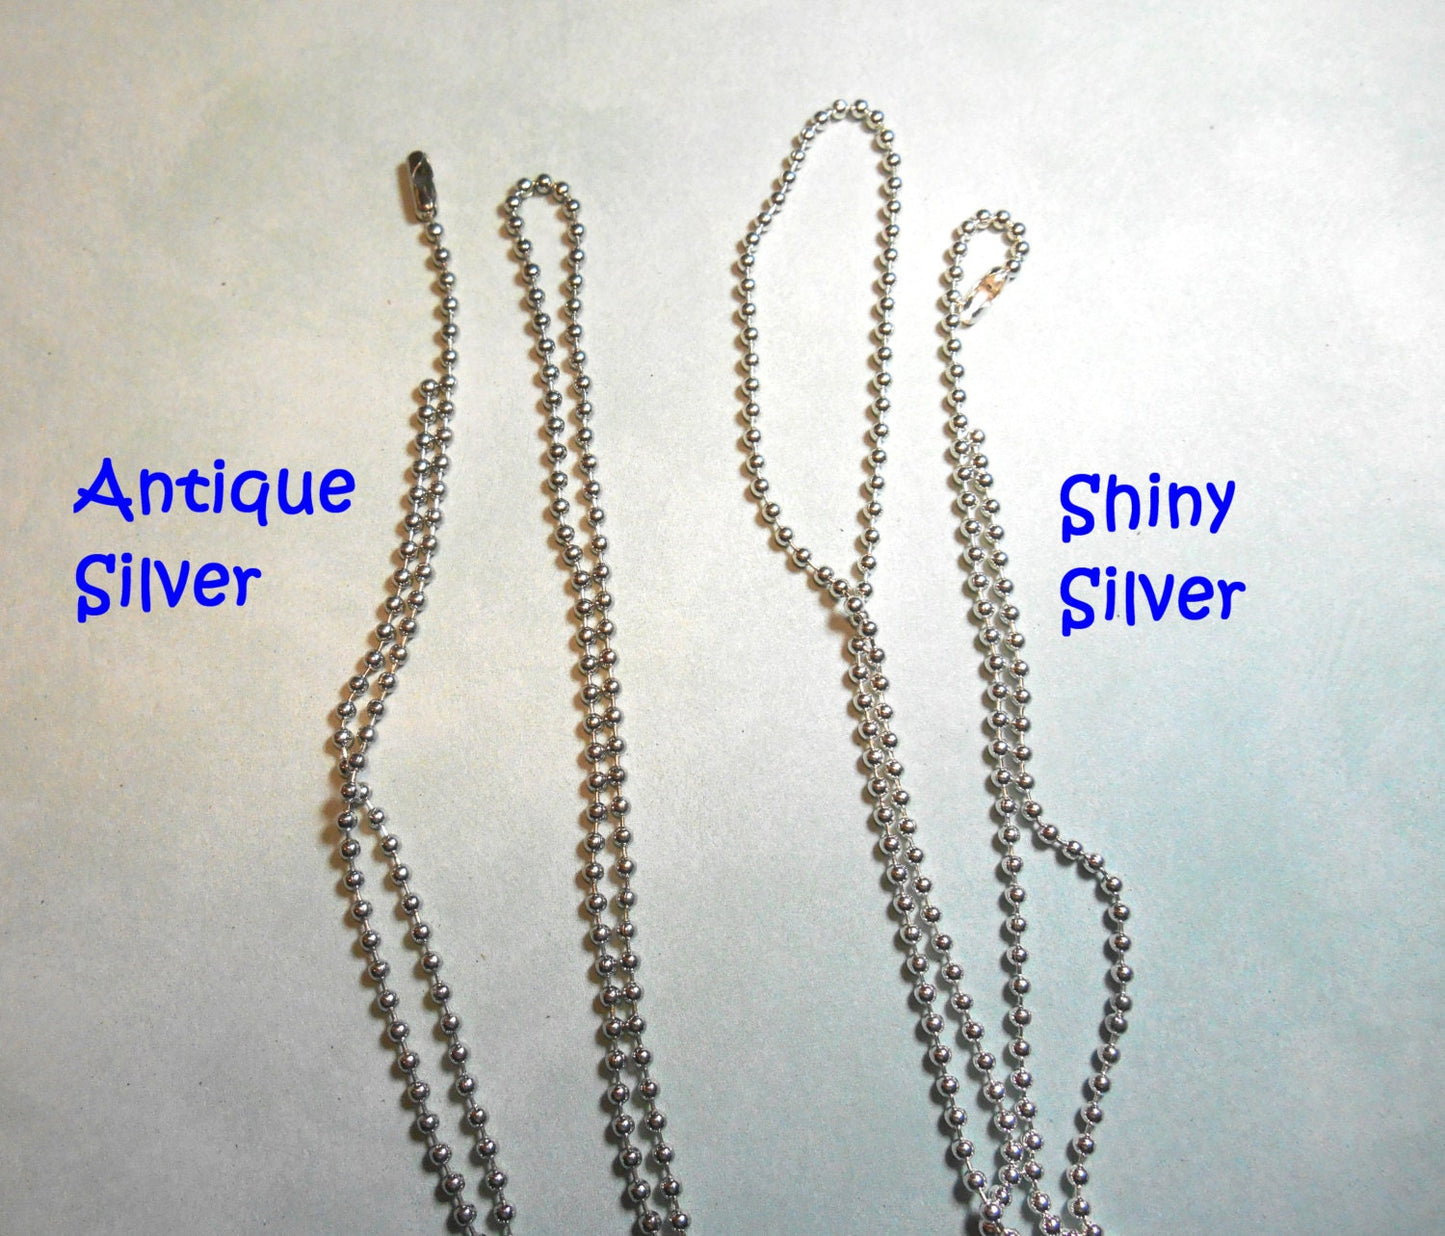 Antique Silver Ball Chain Necklaces - 24 inch - 2.4mm Diameter - Set of 25